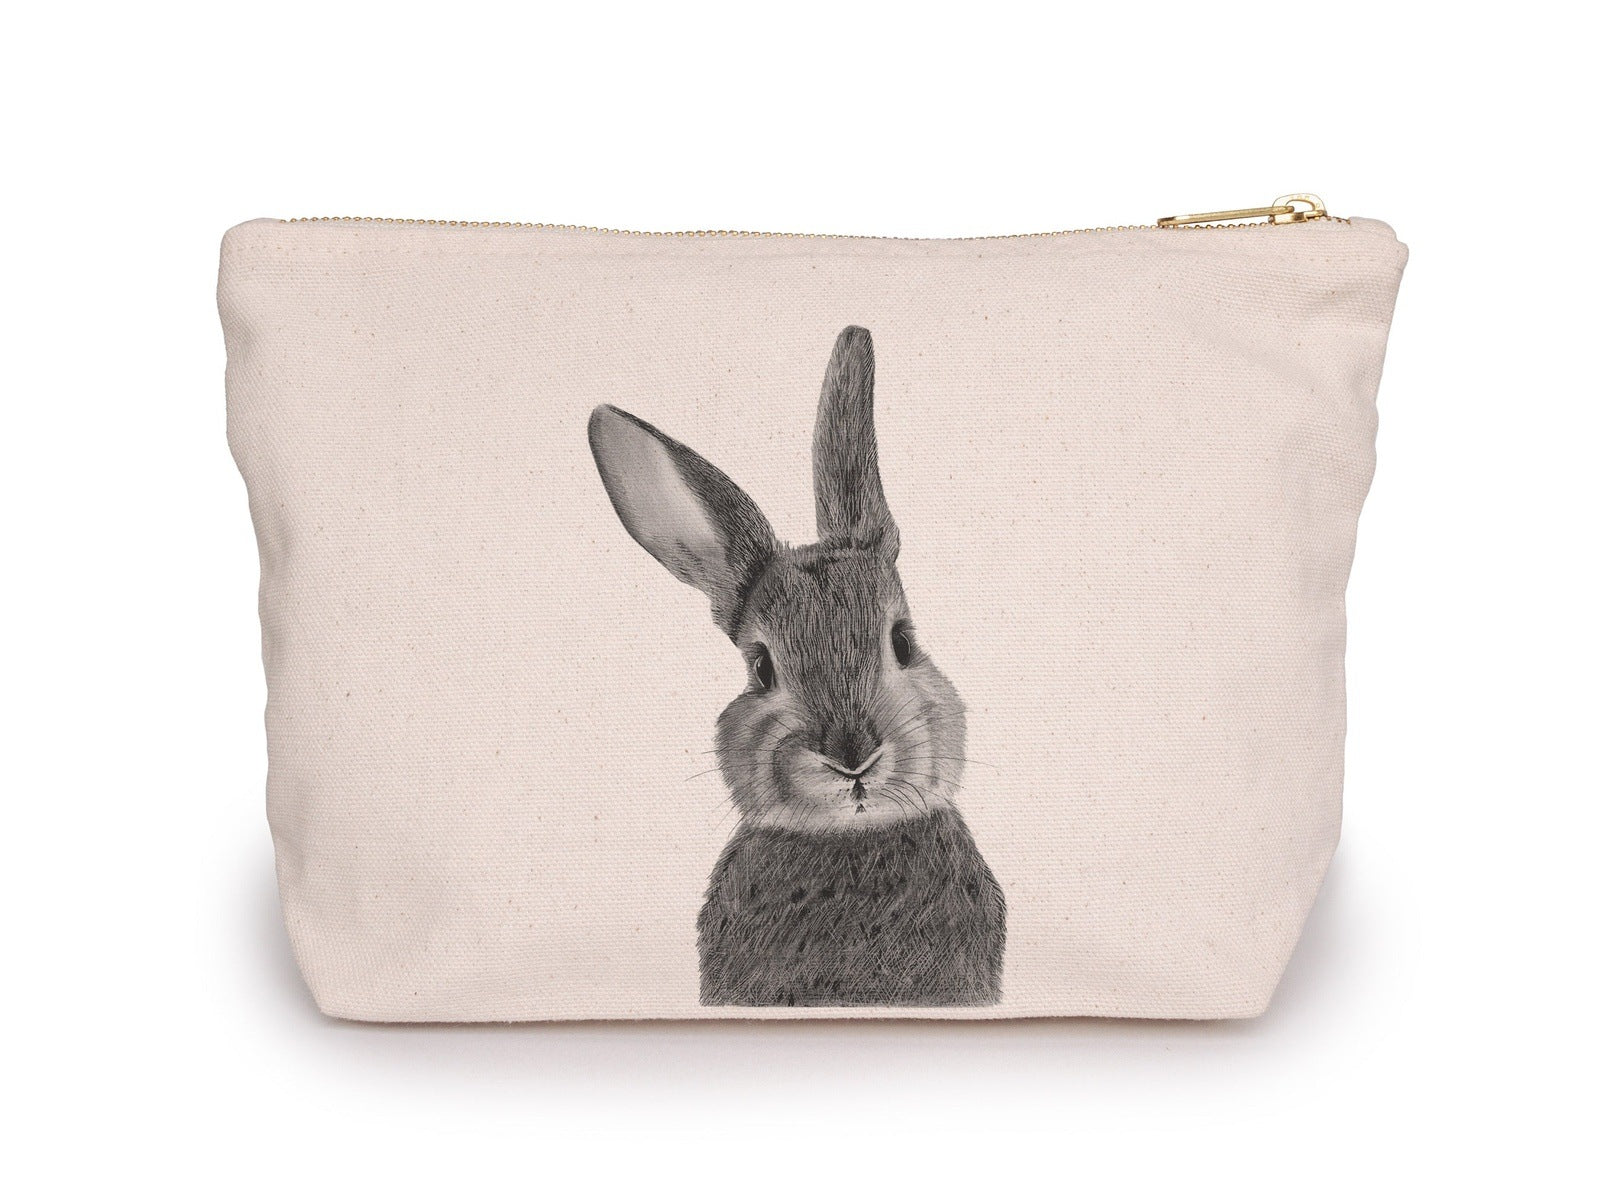 Bunny Pouch Bag From Libra Fine Arts